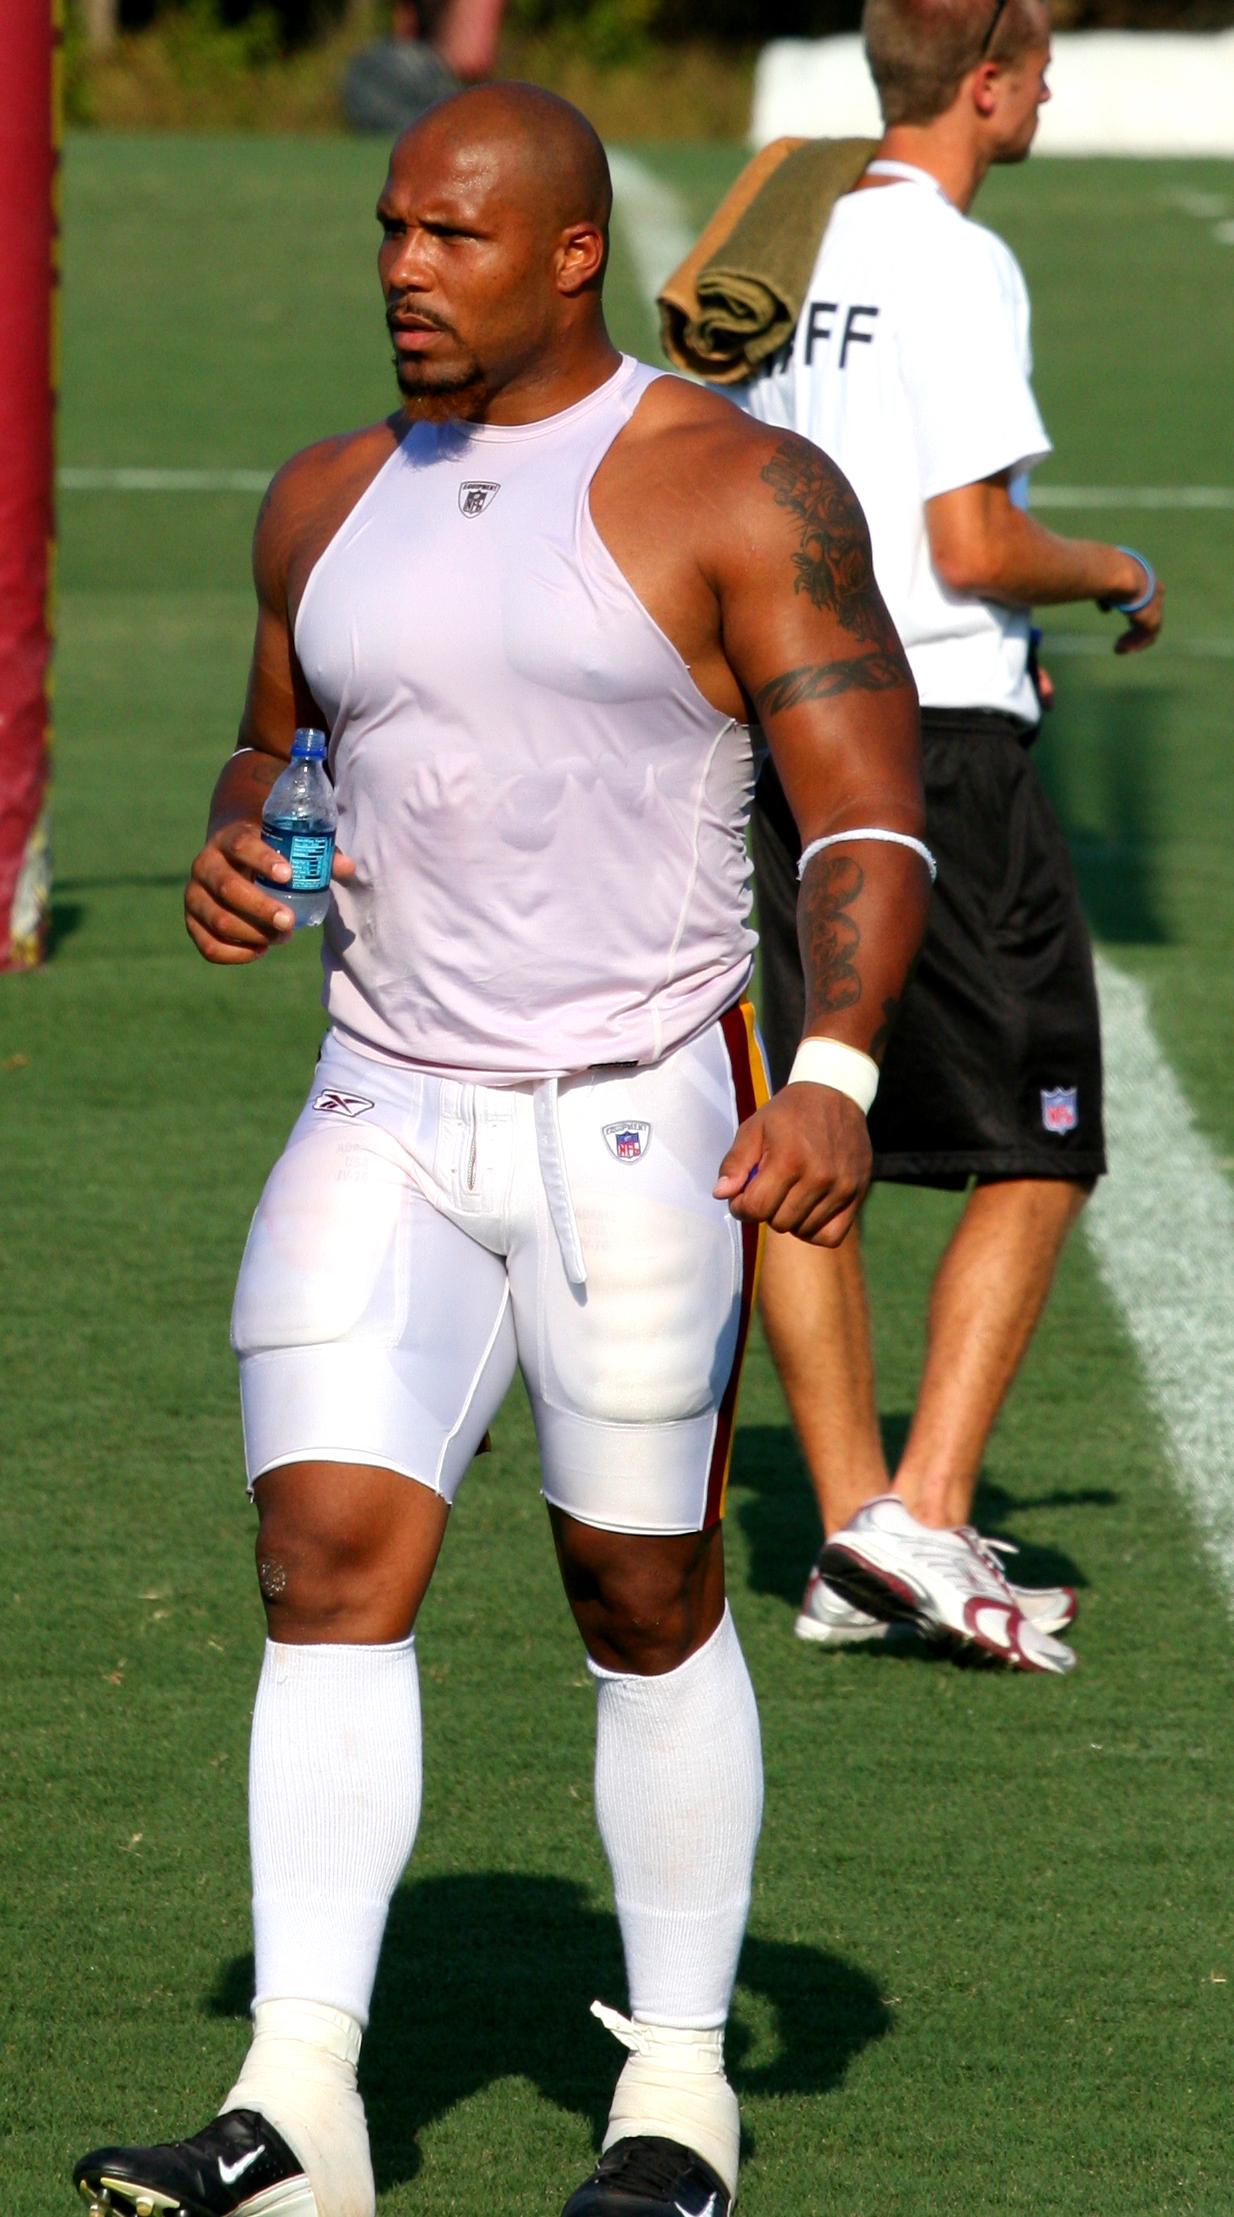 Top 30 Jacked NFL Players.